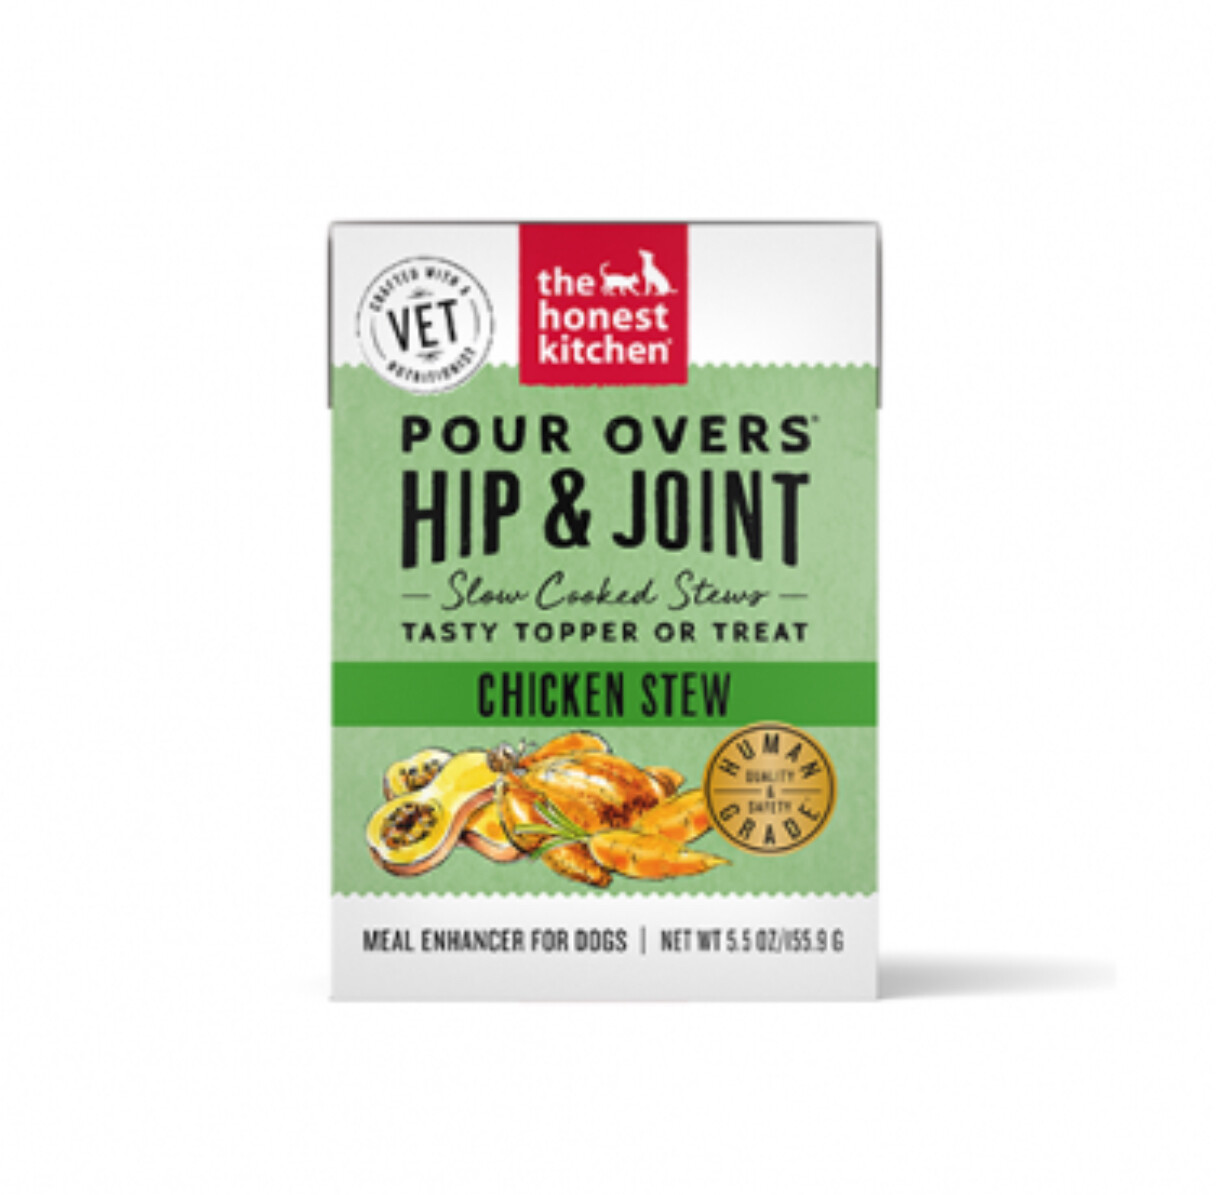 Hip & Joint Pour Overs - Chicken Stew - The Honest Kitchen